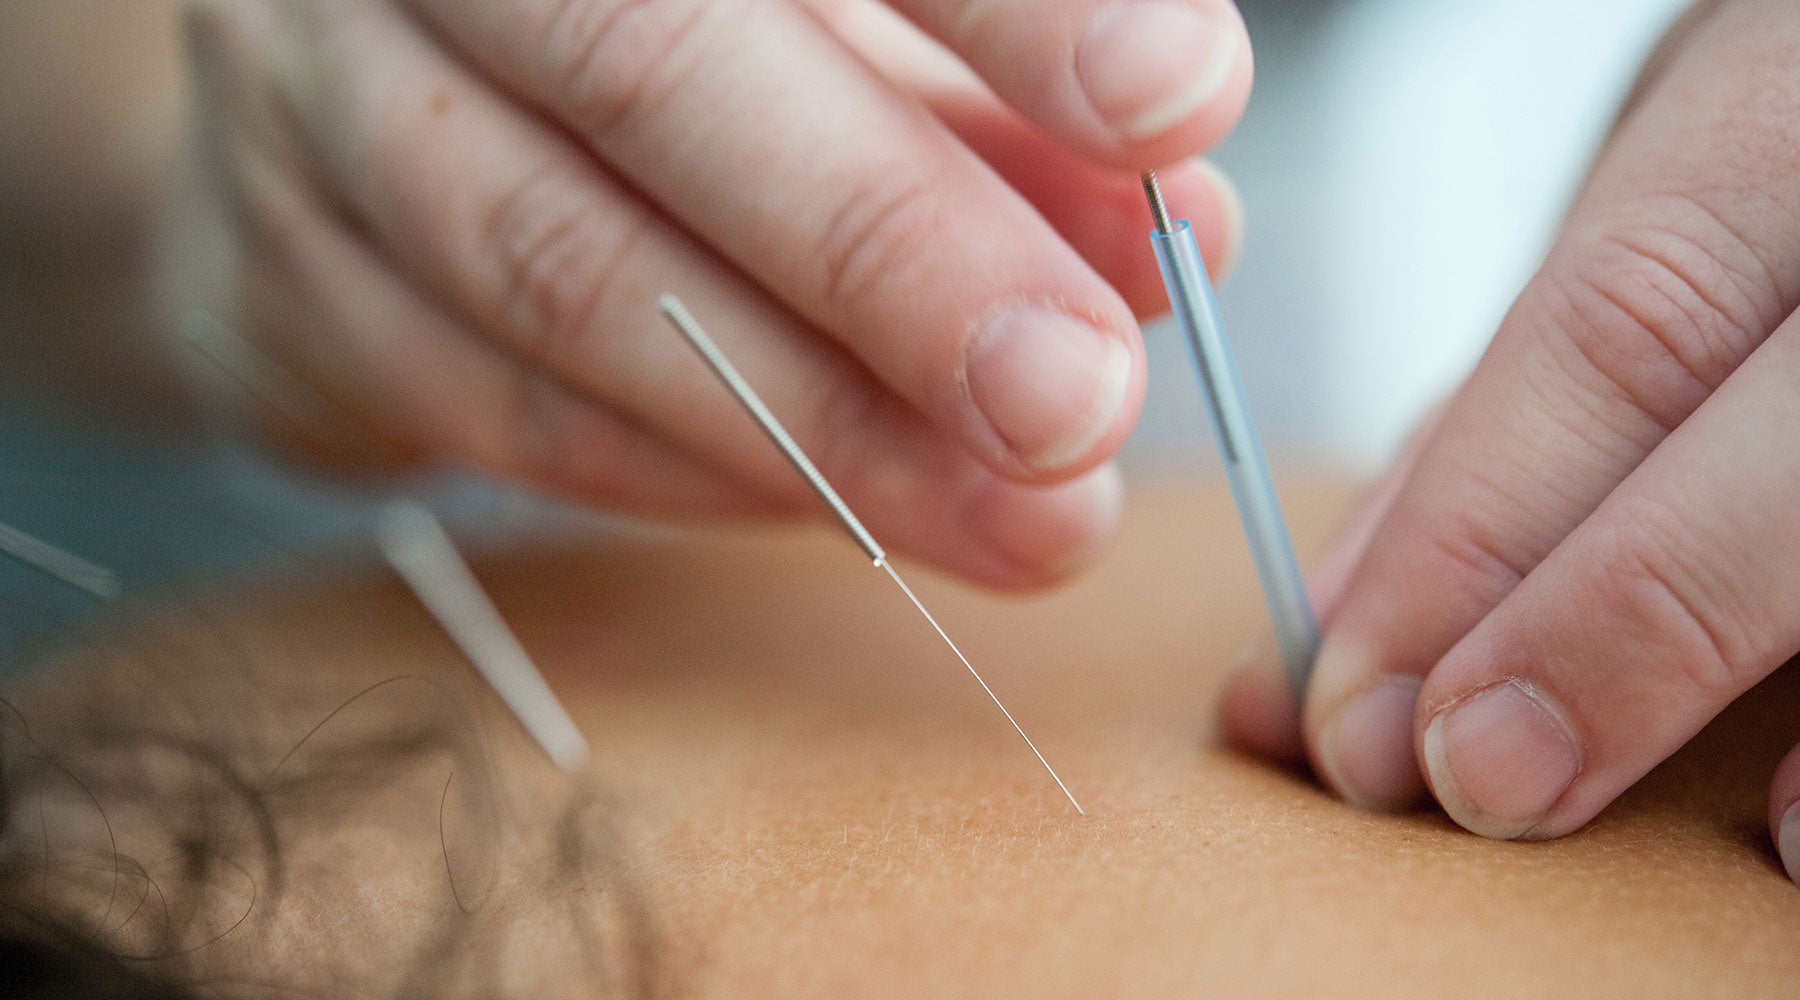 What Is the Difference Between Dry Needling and Acupuncture?